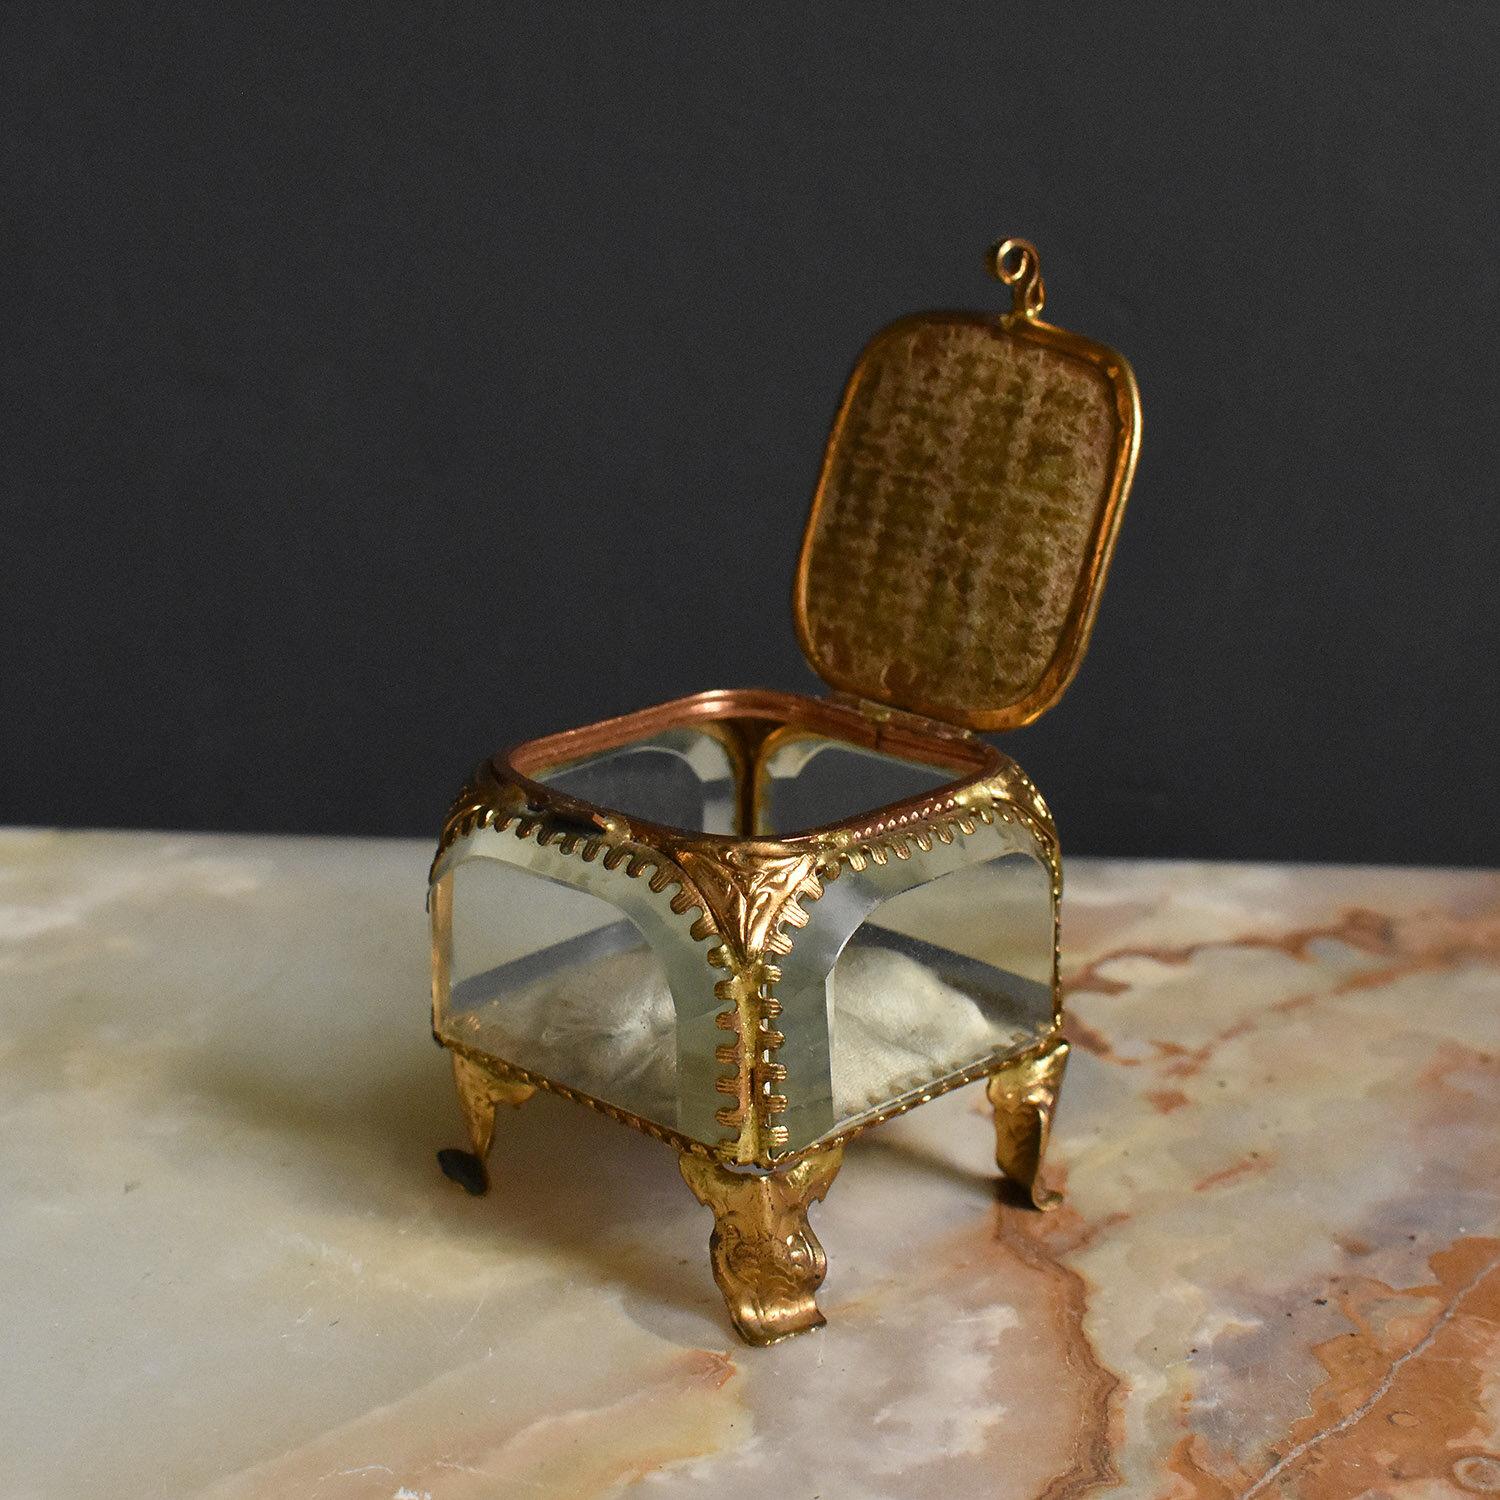 Antique French Gilt Brass and Cut Glass Souvenir Jewellery Casket, 19th Century For Sale 4